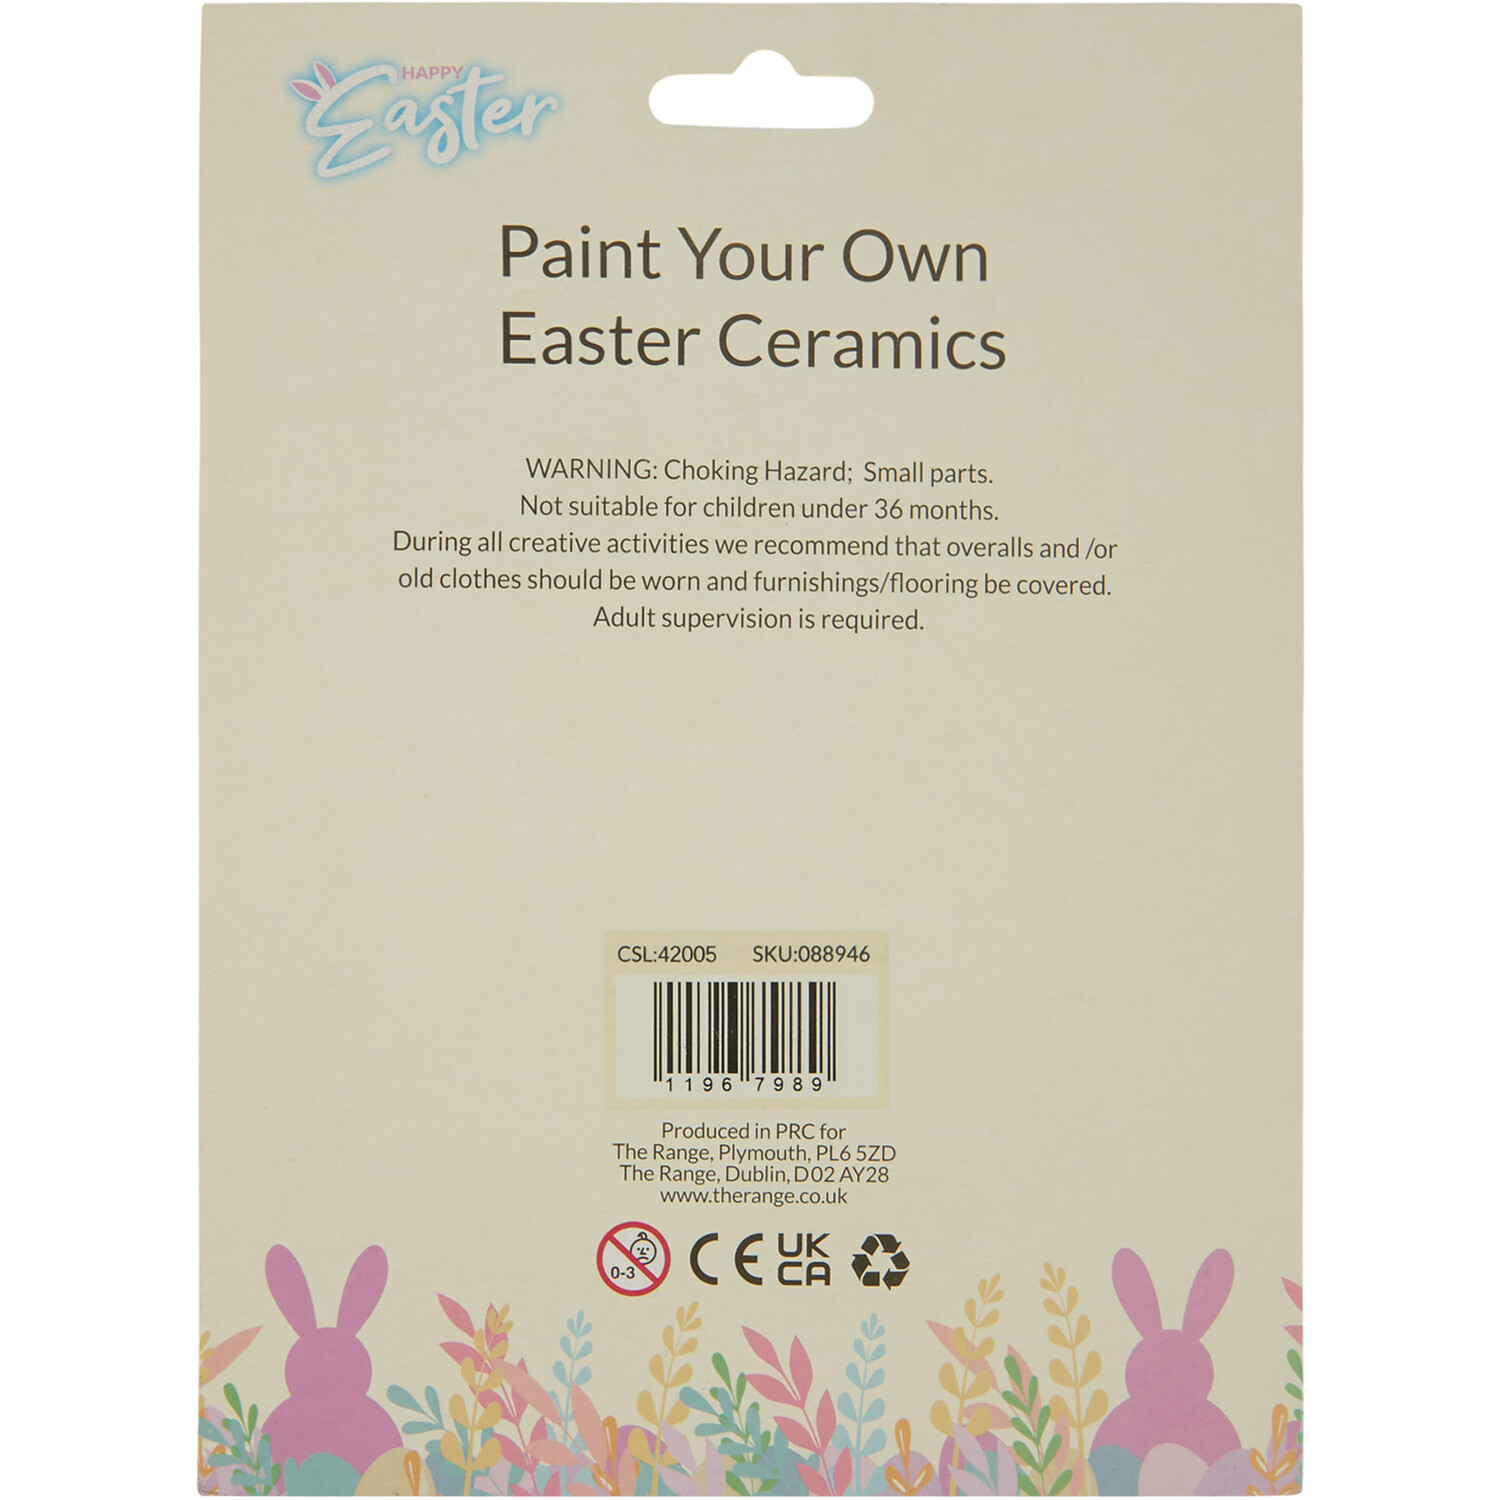 Happy Easter Paint Your Own Easter Ceramics Set Image 4